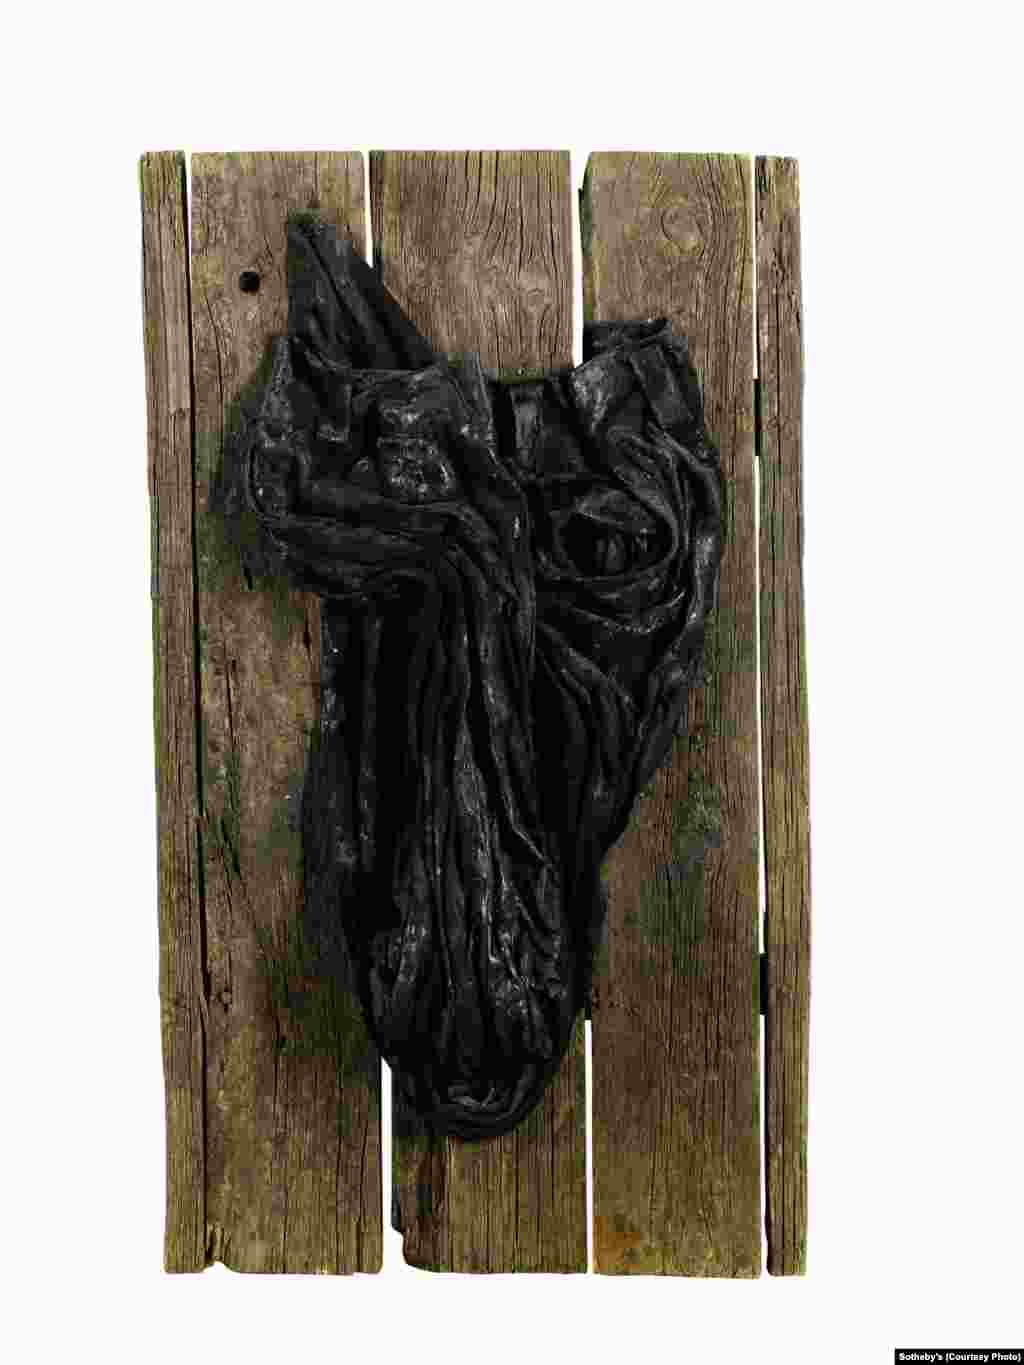 &ldquo;Bull&rsquo;s Head,&rdquo; a 1976 work made of oil-soaked trousers mounted on wooden boards, by Georgian nonconformist artist Avto Varazi (1926-1977). Many of Varazi&rsquo;s works focused on the theme of the bull&rsquo;s head.